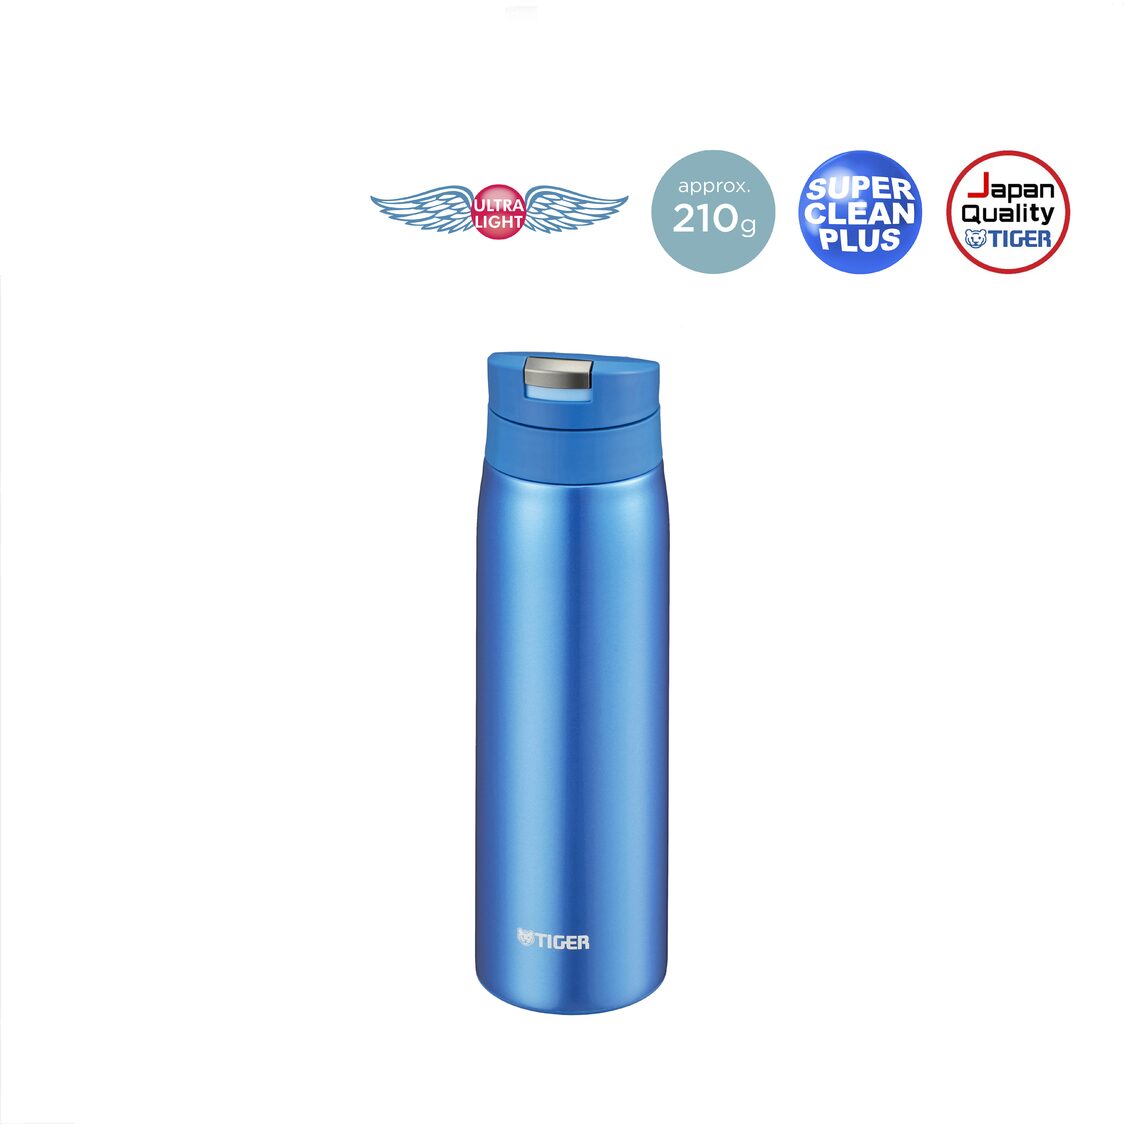 https://media.metro.sg/ProductImages/53f1c6d0-6ad0-41f7-8ed6-0e84f30c894a/2/std/tiger-double-stainless-steel-bottle-500ml-sky-blue-mcx-a501-ak-231209045920.jpg